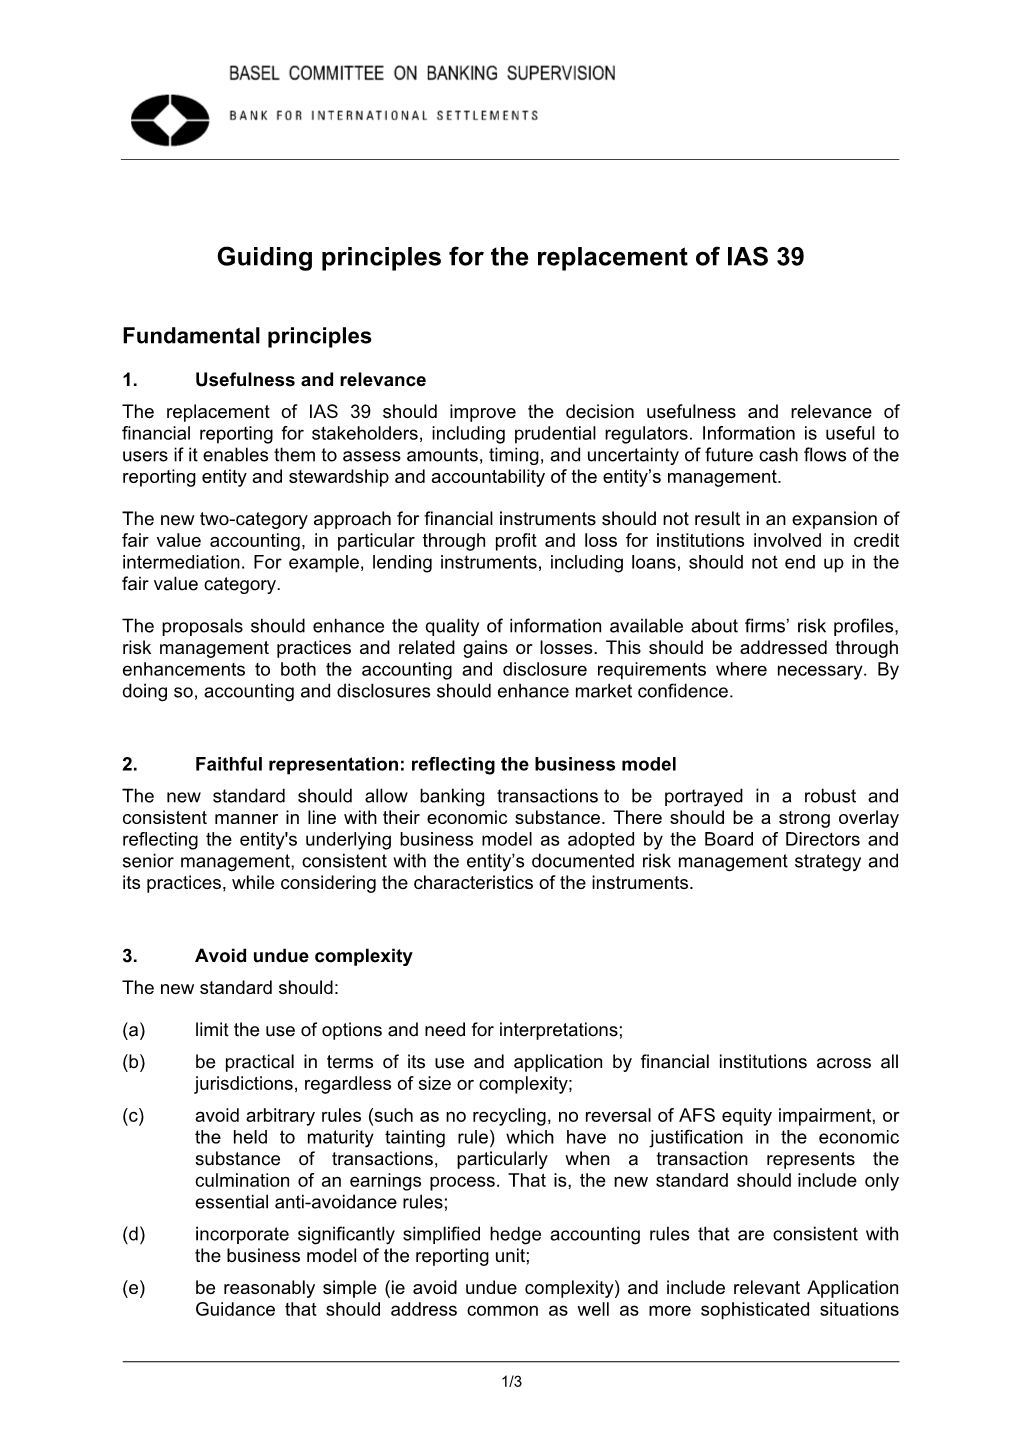 Guiding Principles for the Replacement of IAS 39, August 2009